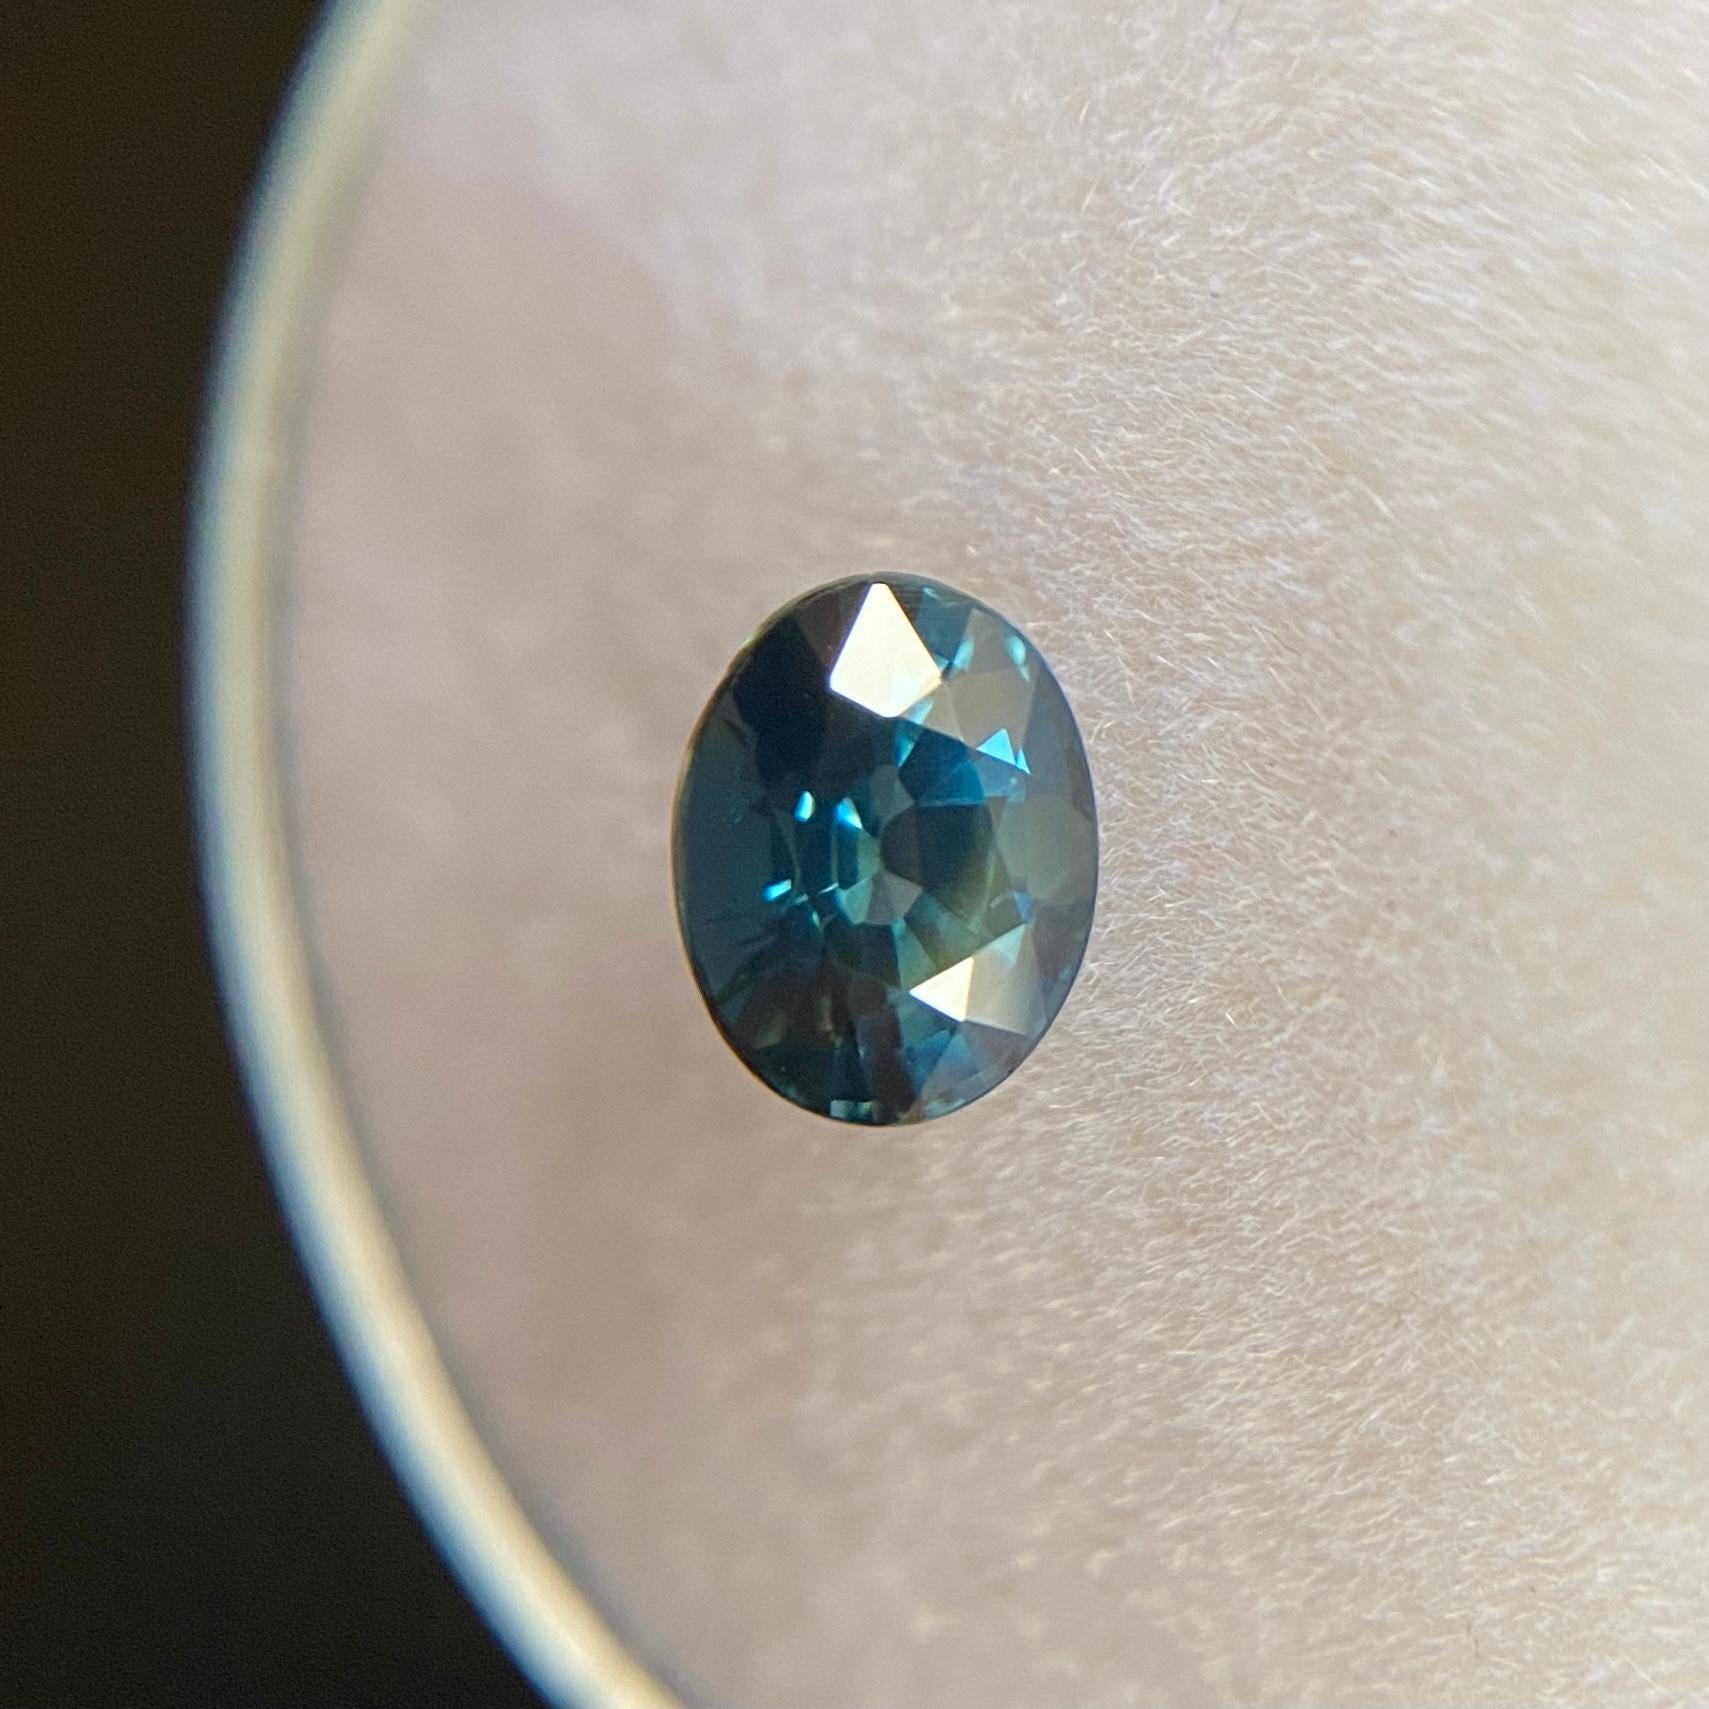 Fine Untreated Royal Blue Australian Sapphire Gemstone.

0.82 Carat with a beautiful royal blue colour and very good clarity, a clean stone with only some small natural inclusions visible when looking closely. 

Also has an excellent oval cut and